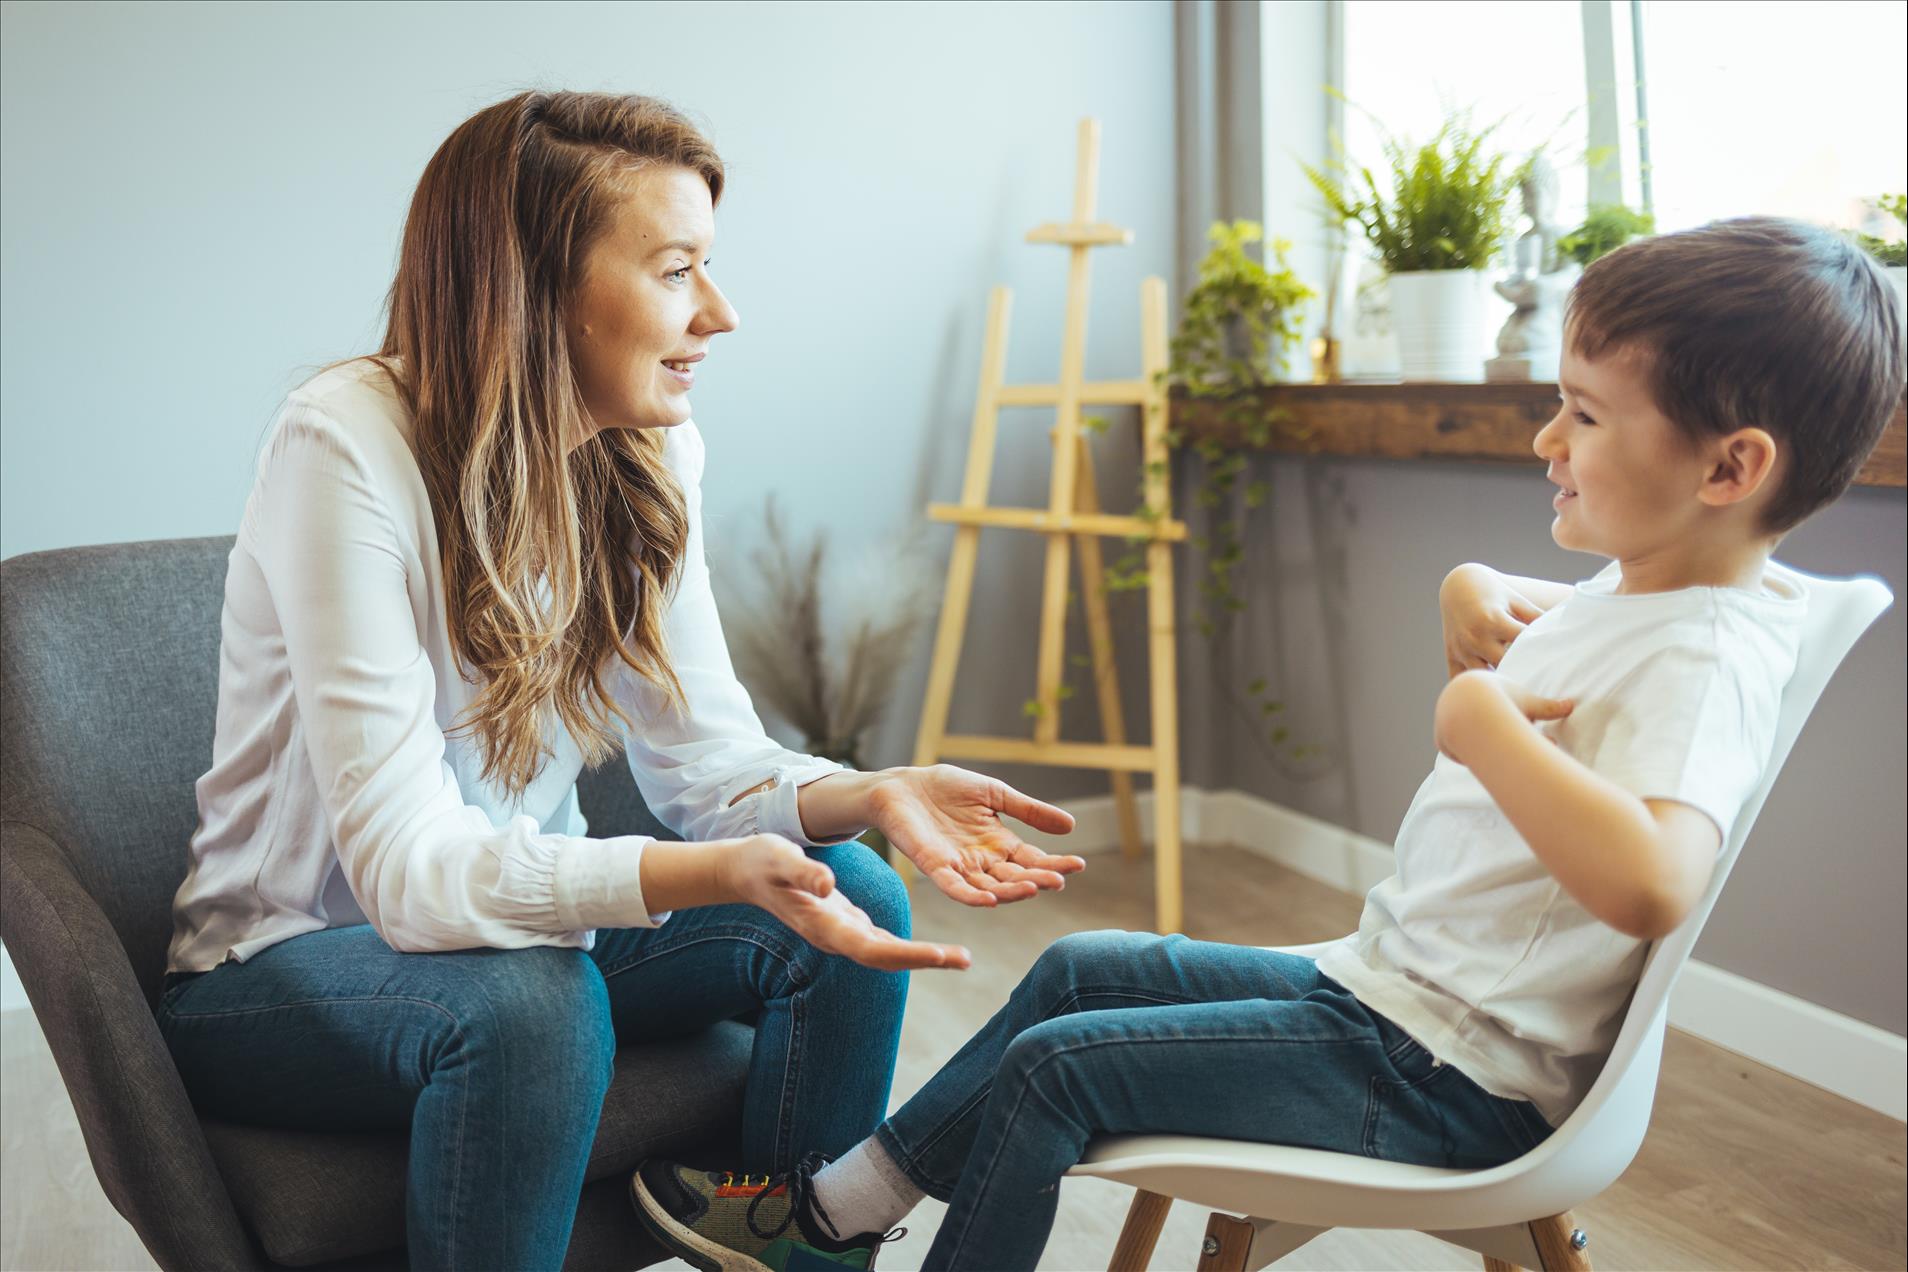 Wondering About ADHD, Autism And Your Child's Development? What To Know About Getting A Neurodevelopmental Assessment